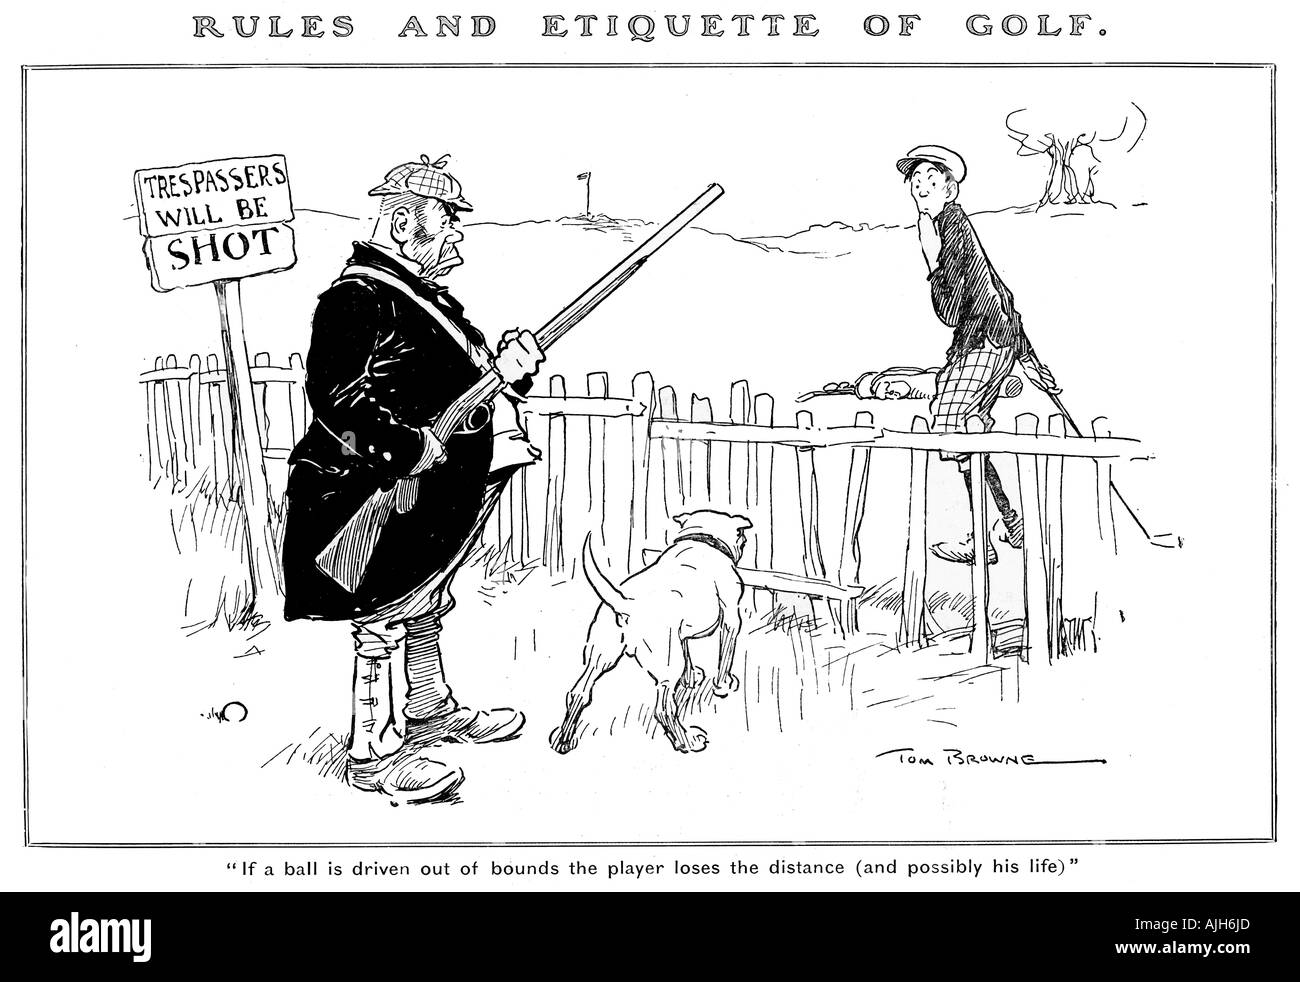 Tom Brownes Rules Etiquette of Golf V 1906 If a ball is driven out of bounds the player loses the distance possibly his life Stock Photo